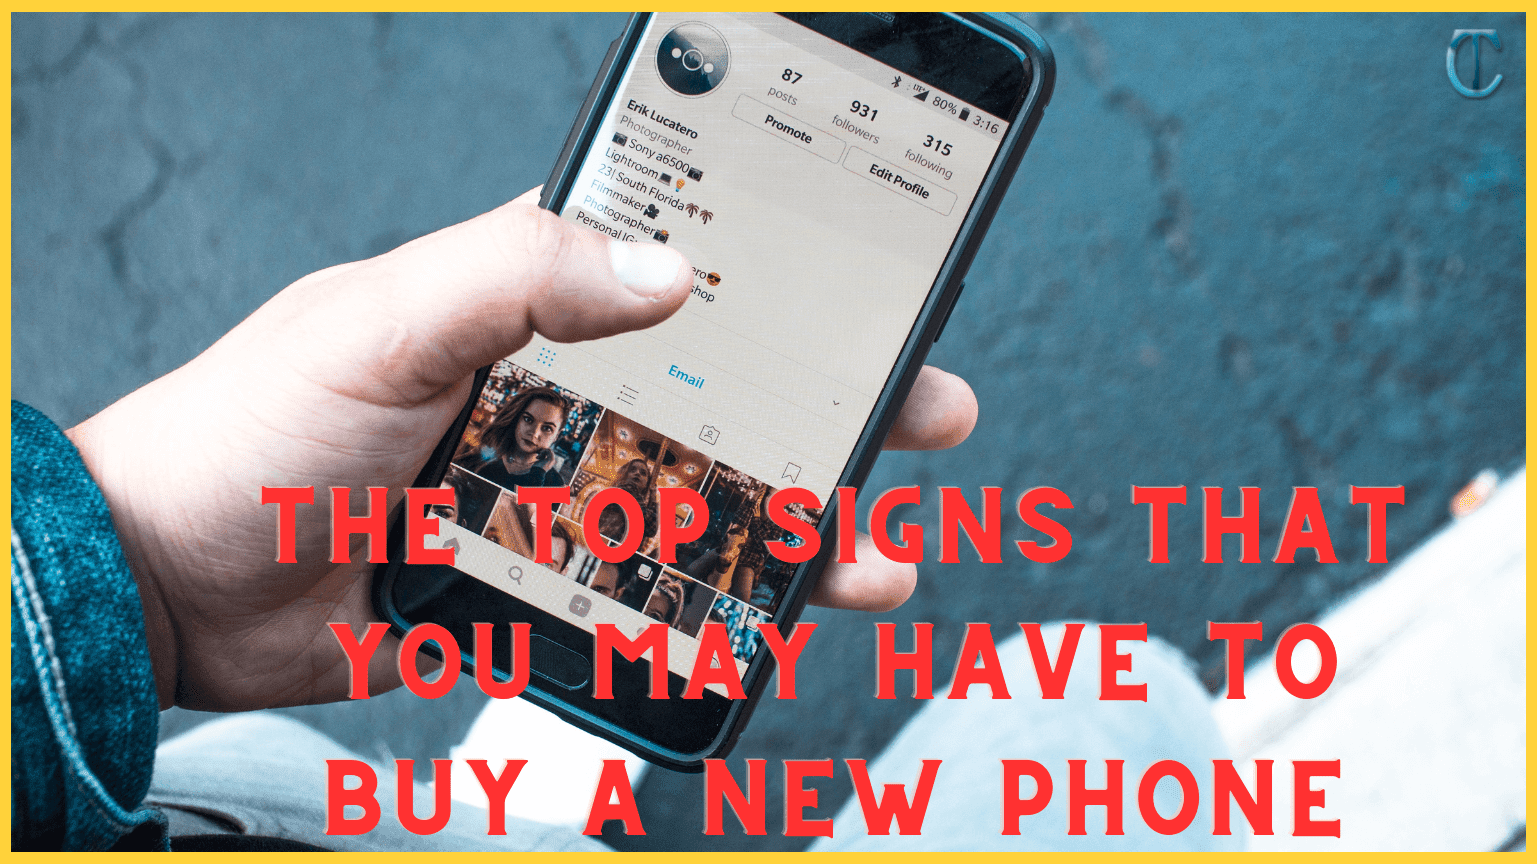 The Top Signs That You May Have To Buy a New Phone